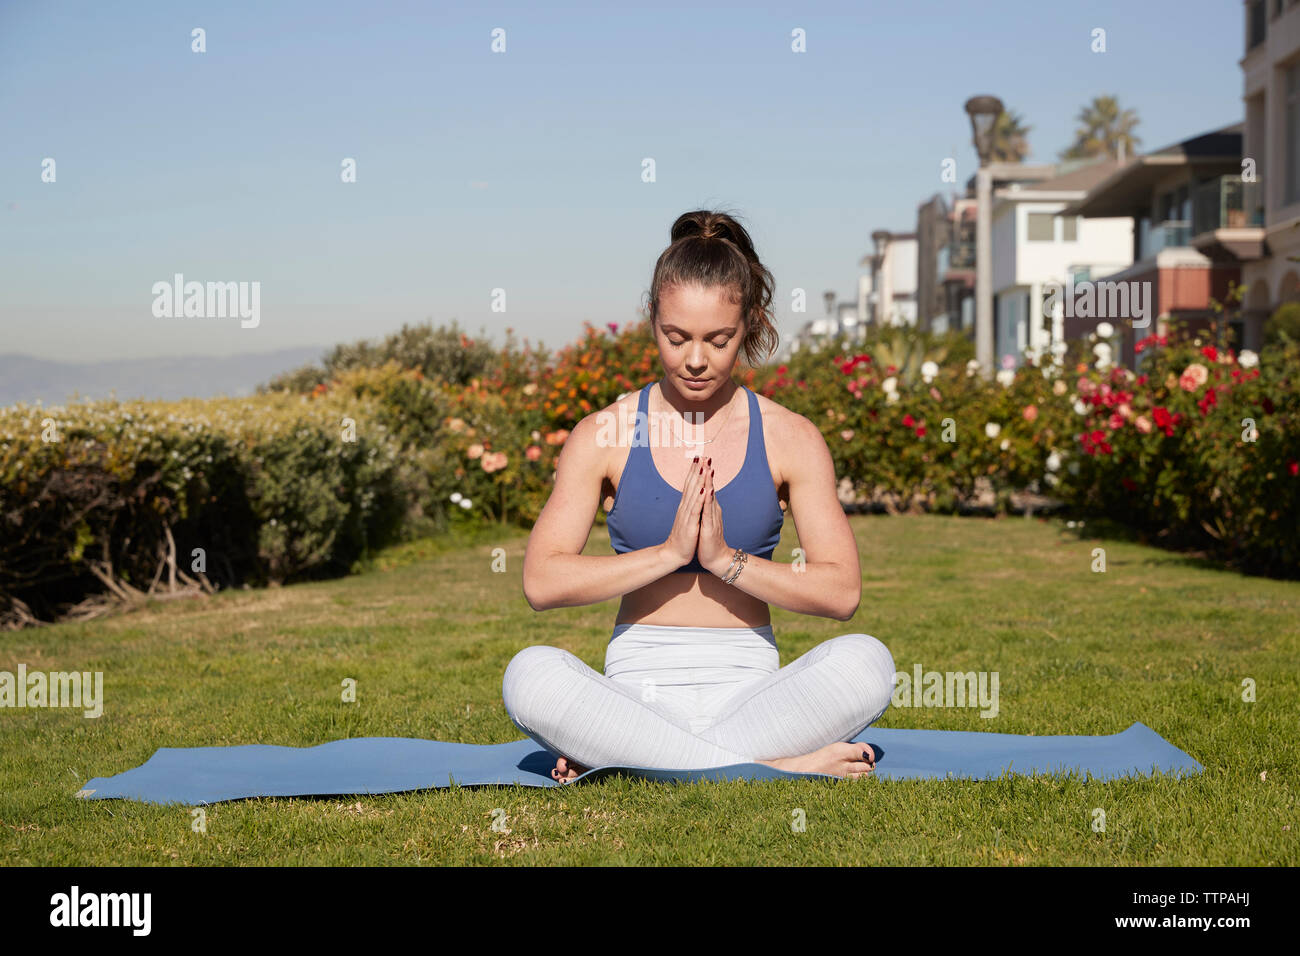 Woman with hands clasped and cross-legged meditating on exercise mat Stock Photo